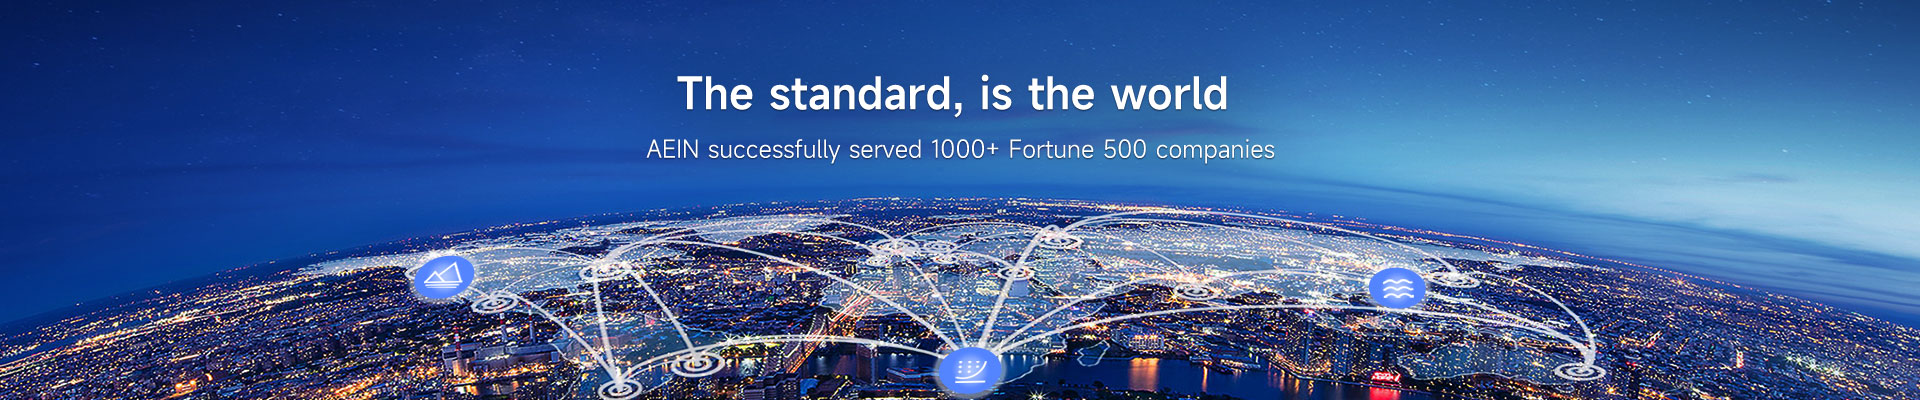 AEIN successfully served 1000+ Fortune 500 companies